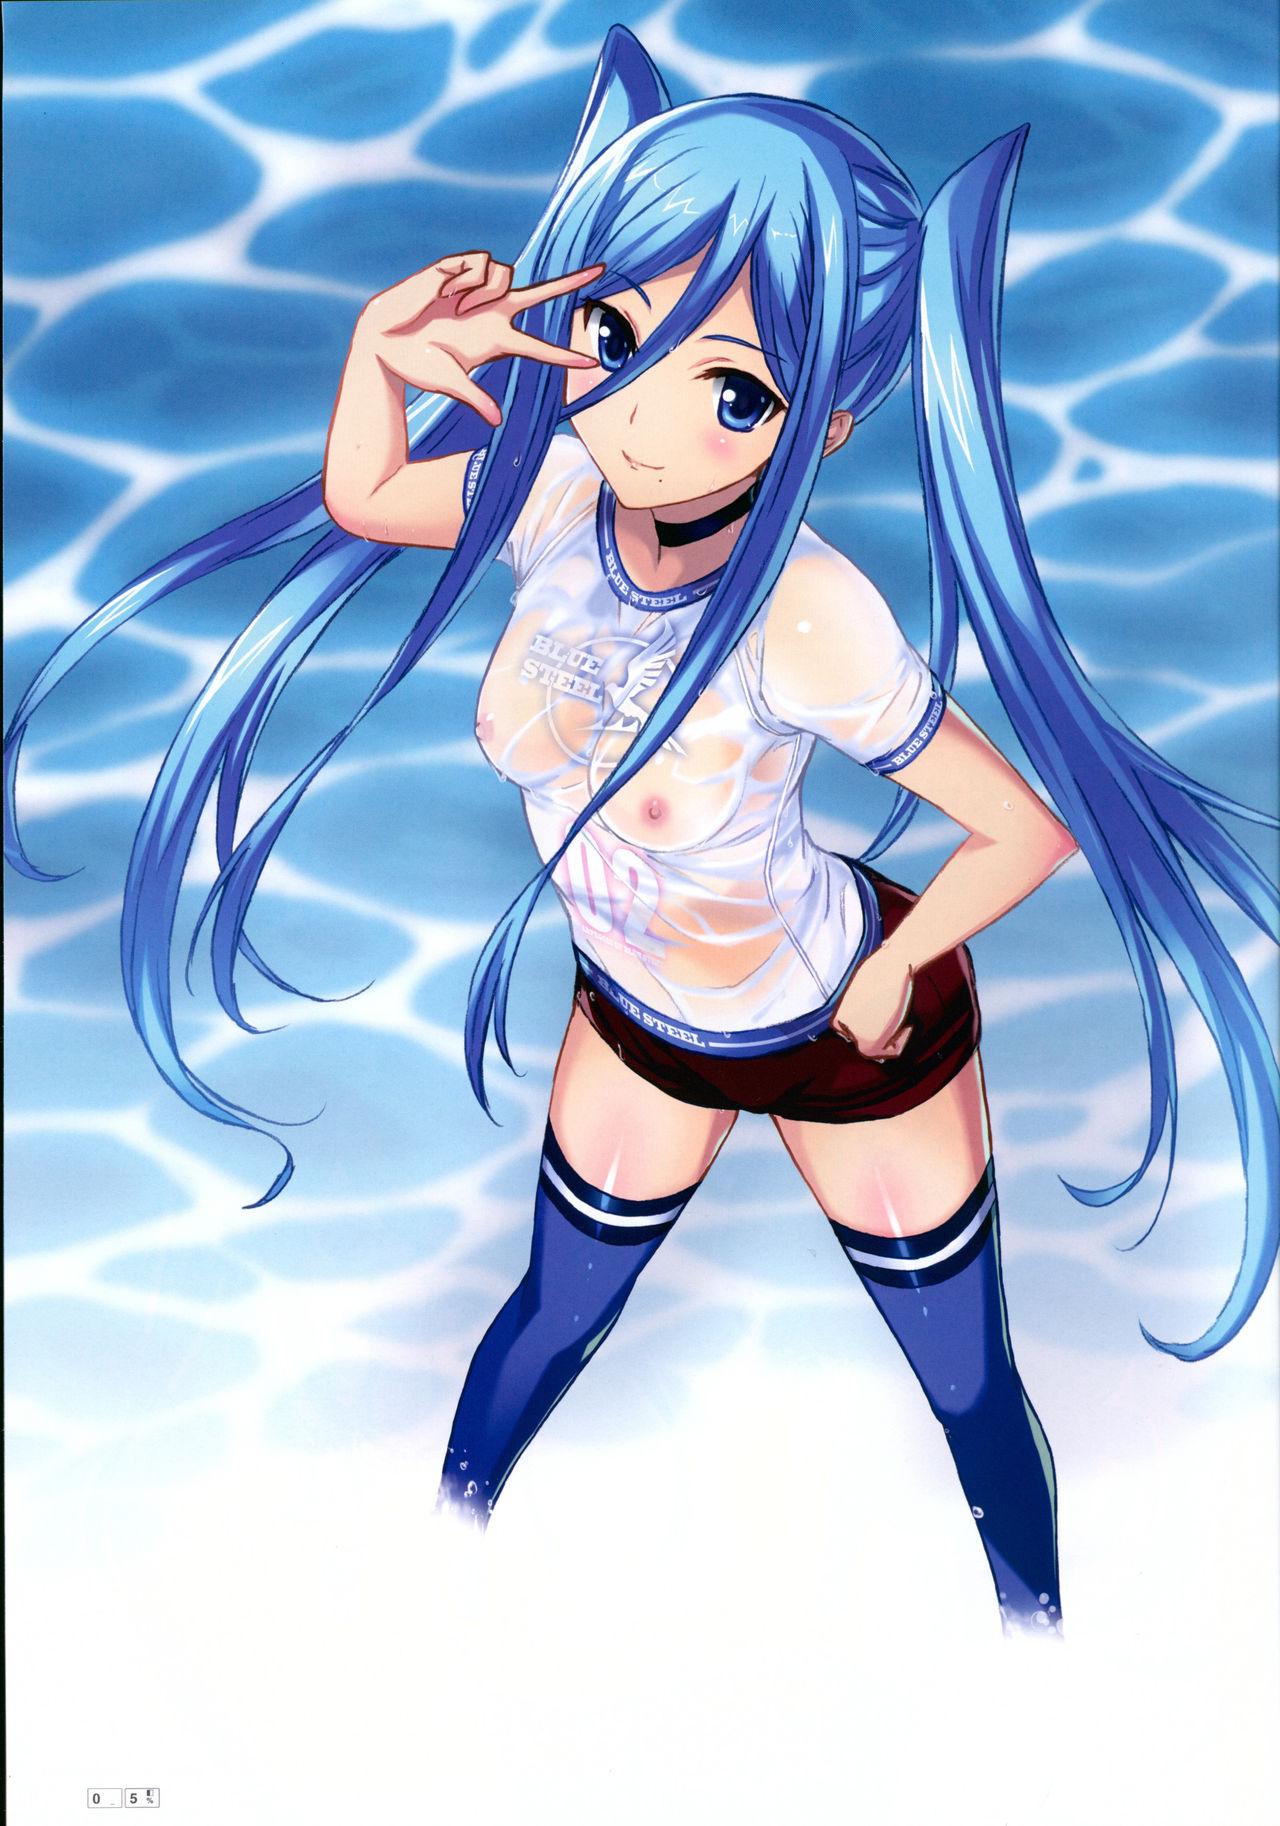 Flash TAKAO OF BLUE STEEL - Arpeggio of blue steel Chinese - Page 4